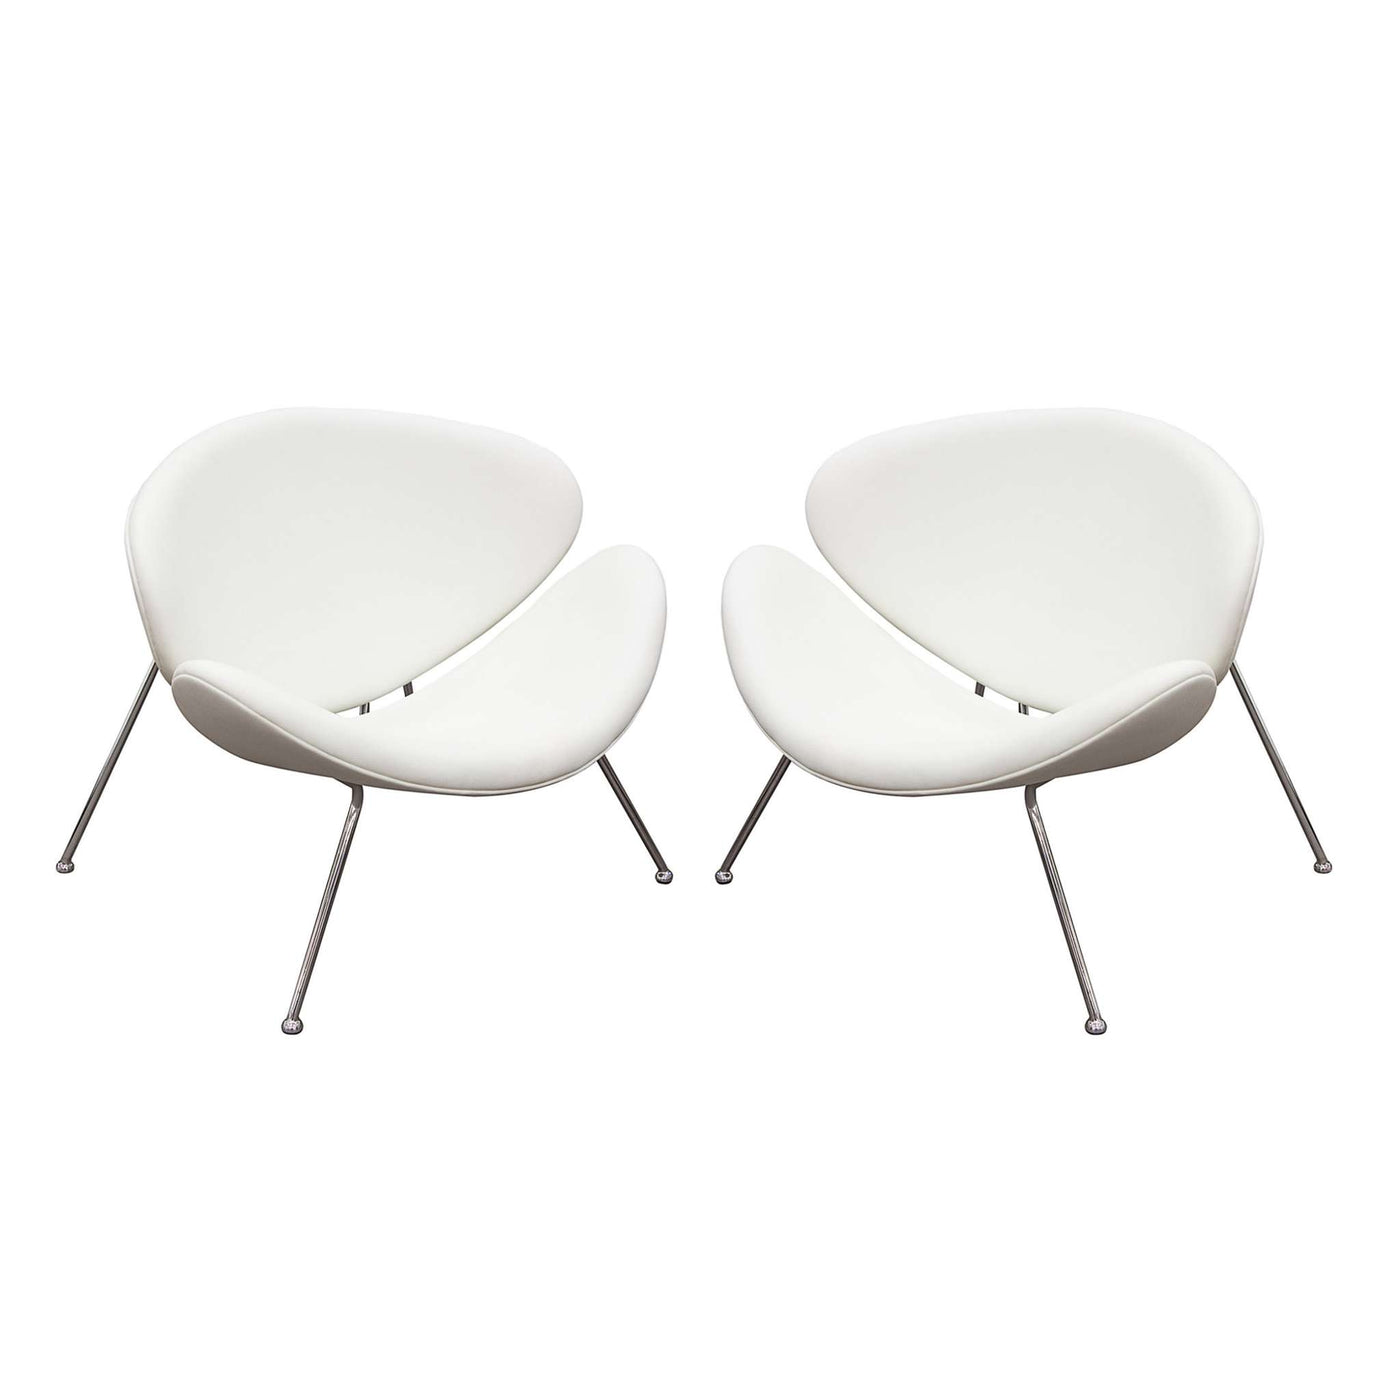 Set of (2) Accent Chairs with Chrome Frame by Diamond Sofa